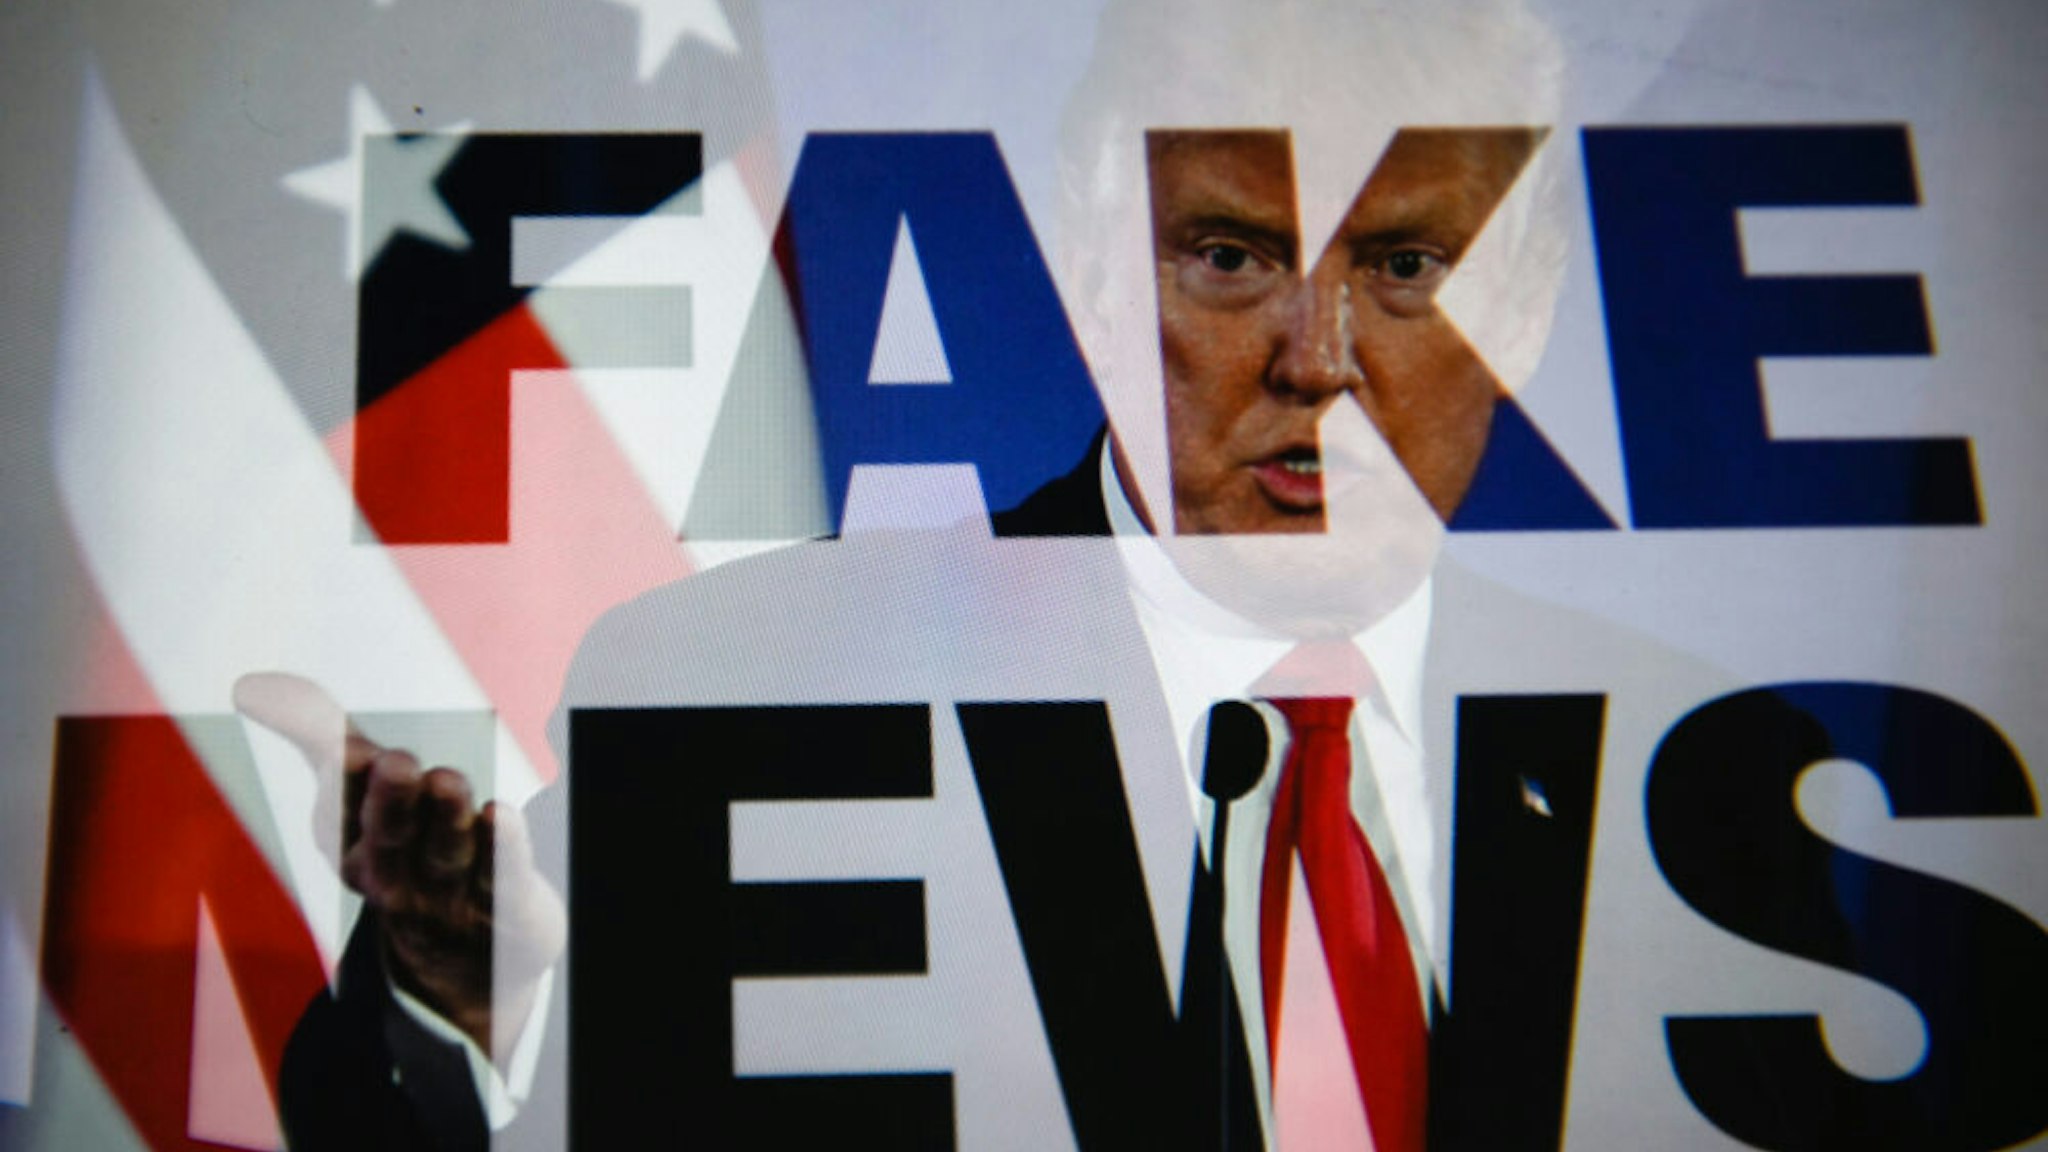 KRAKOW, POLAND - 2018/07/26: (EDITORS NOTE: This image has been altered: [Double exposure].) In this photo illustration a double exposure image shows the President of United States of America, Donald Trump with a sentence saying "Fake news".